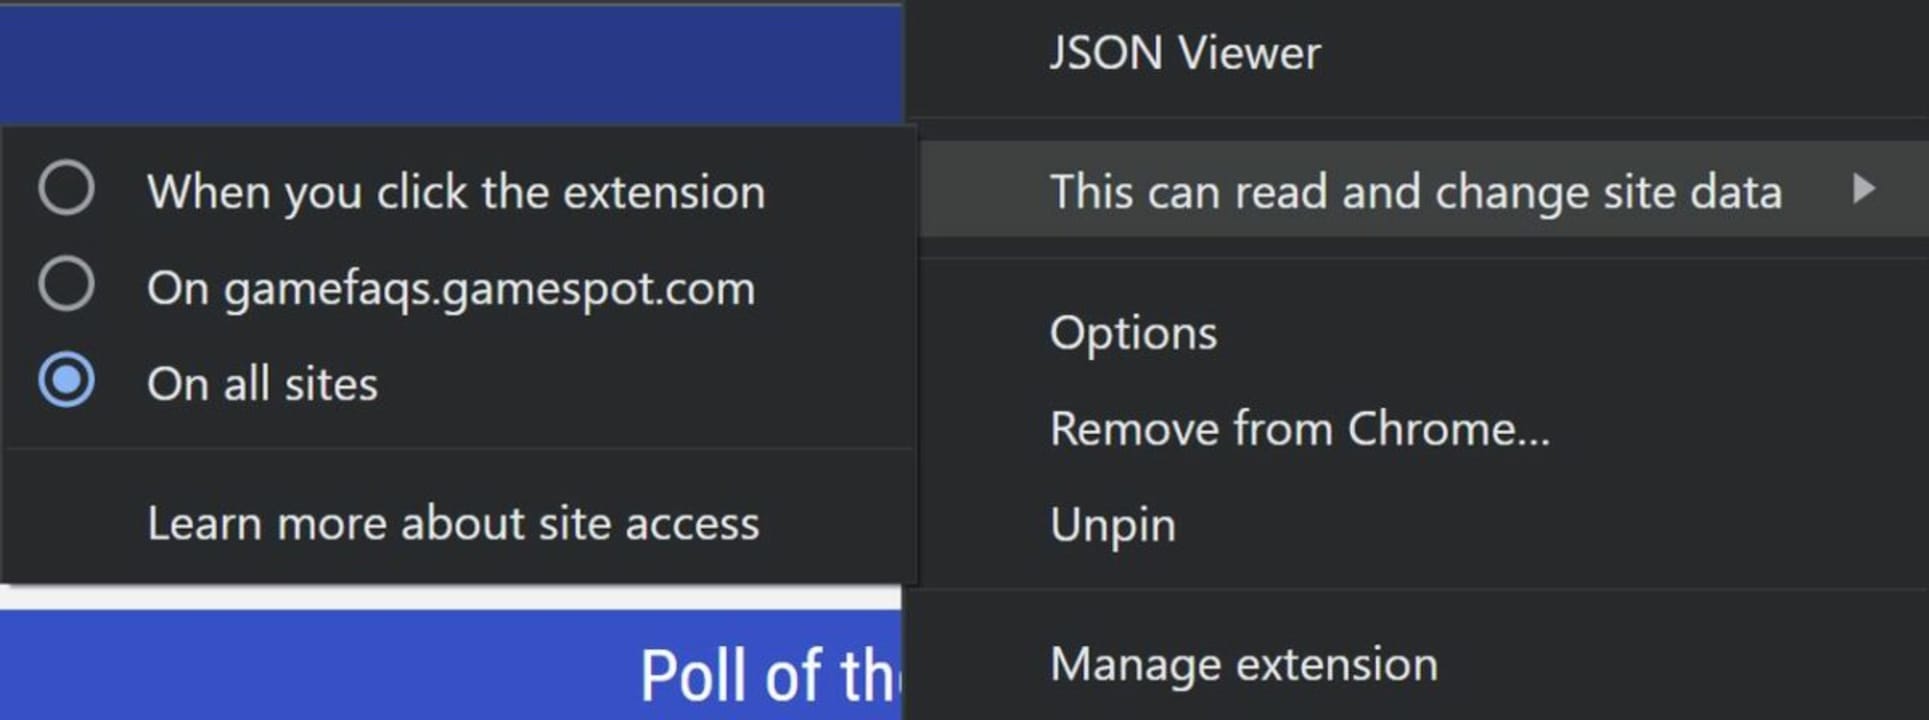 From this menu, select how you want JSON Viewer to interact with sites you visit